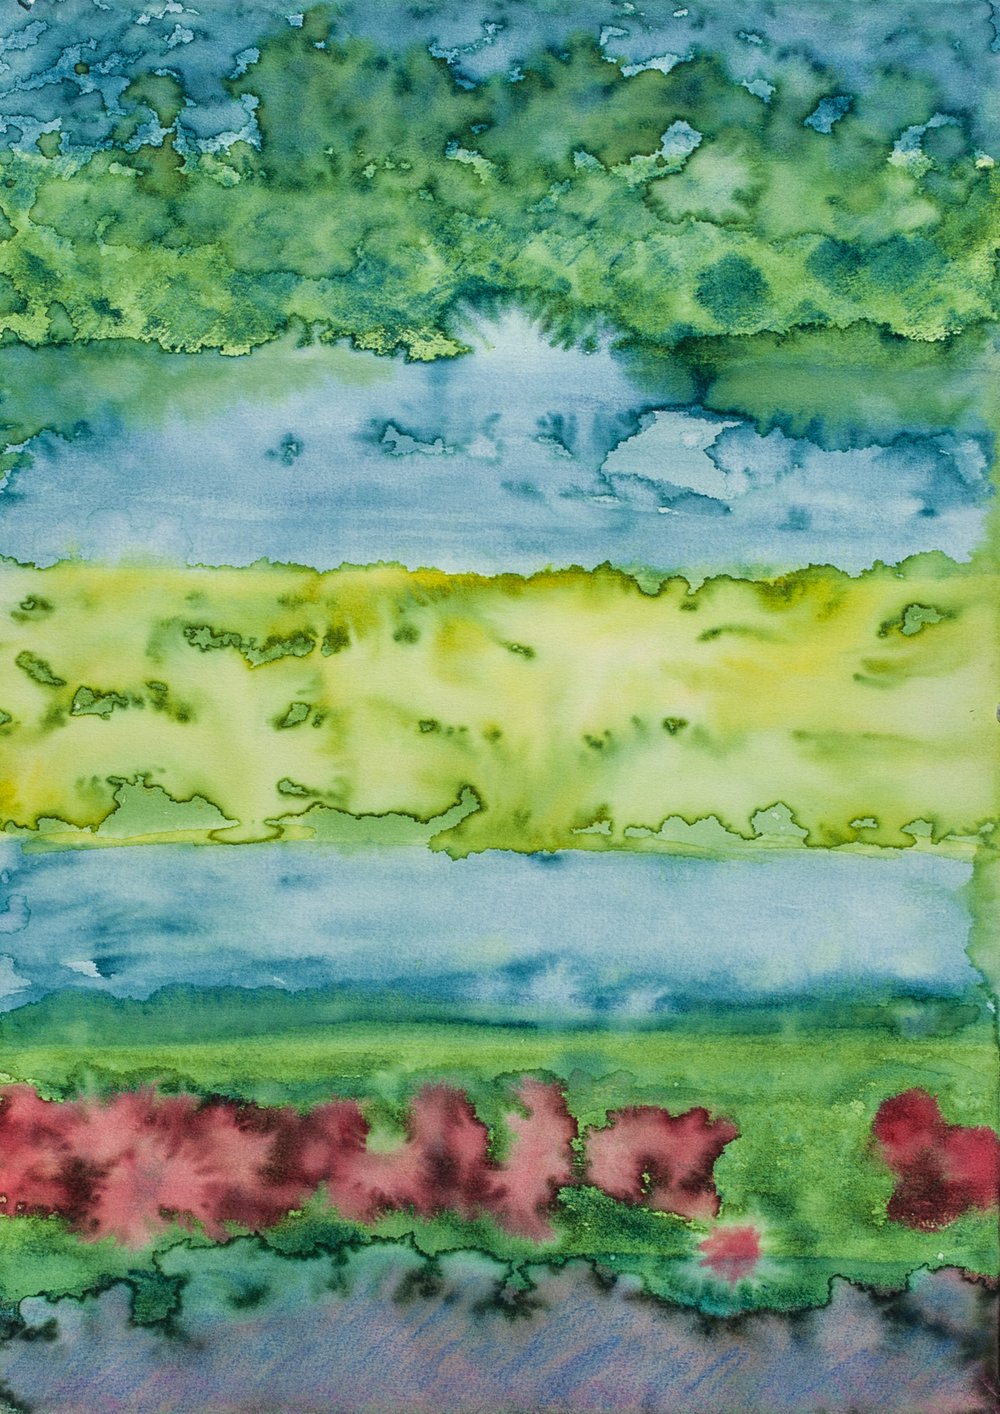  Bernard C. Meyers,  Verdant Daze , 1997&nbsp; 20”x30” Azo Dyes, on Arches Cover, Unique, signed by the artist 